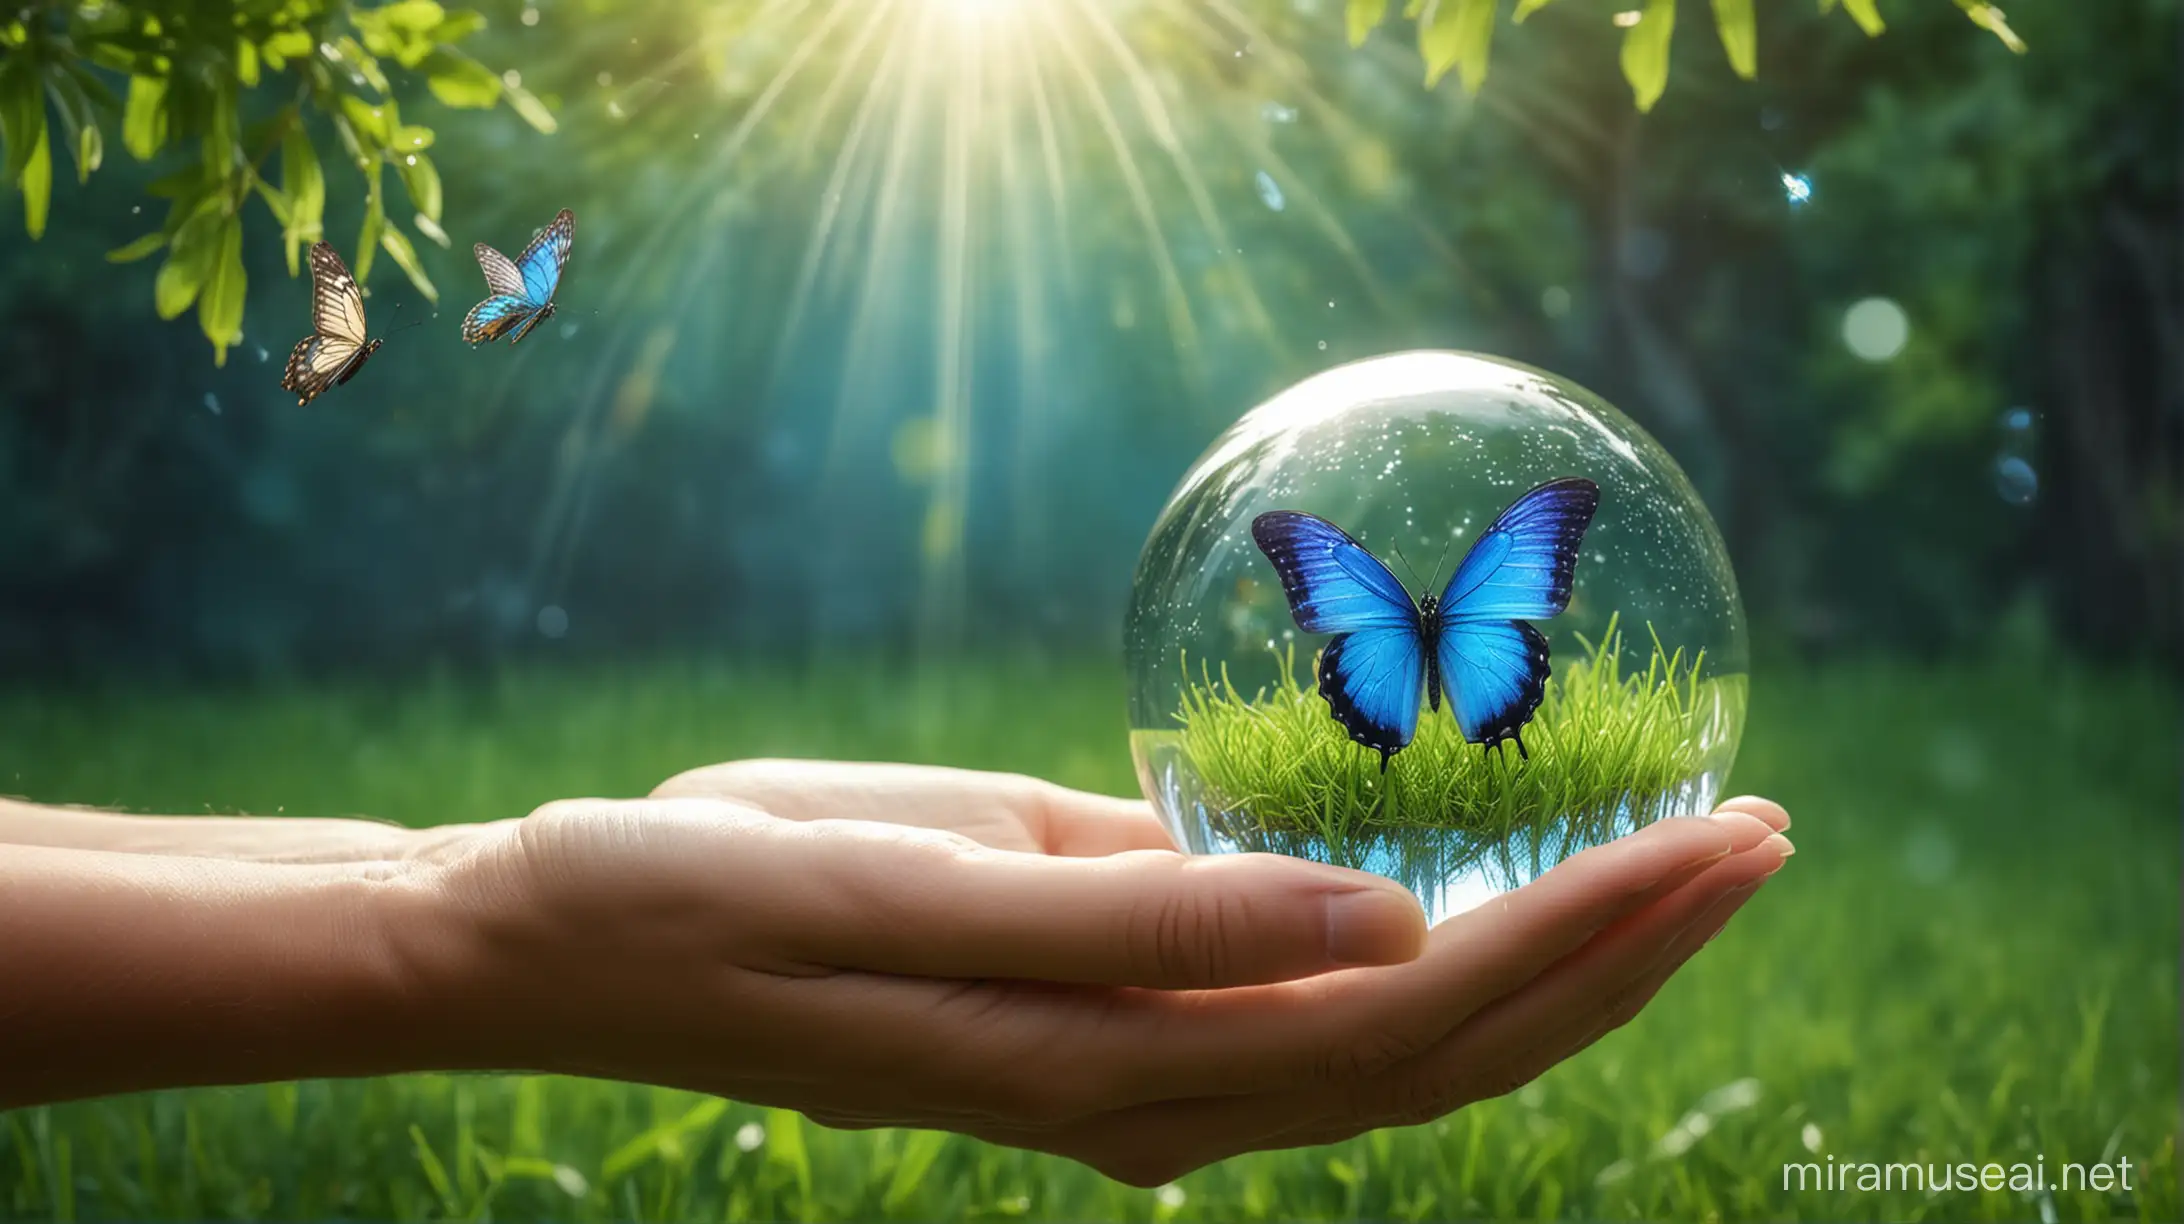 Crystal Globe Held in Hand with Flying Butterfly and Fresh Grass Background